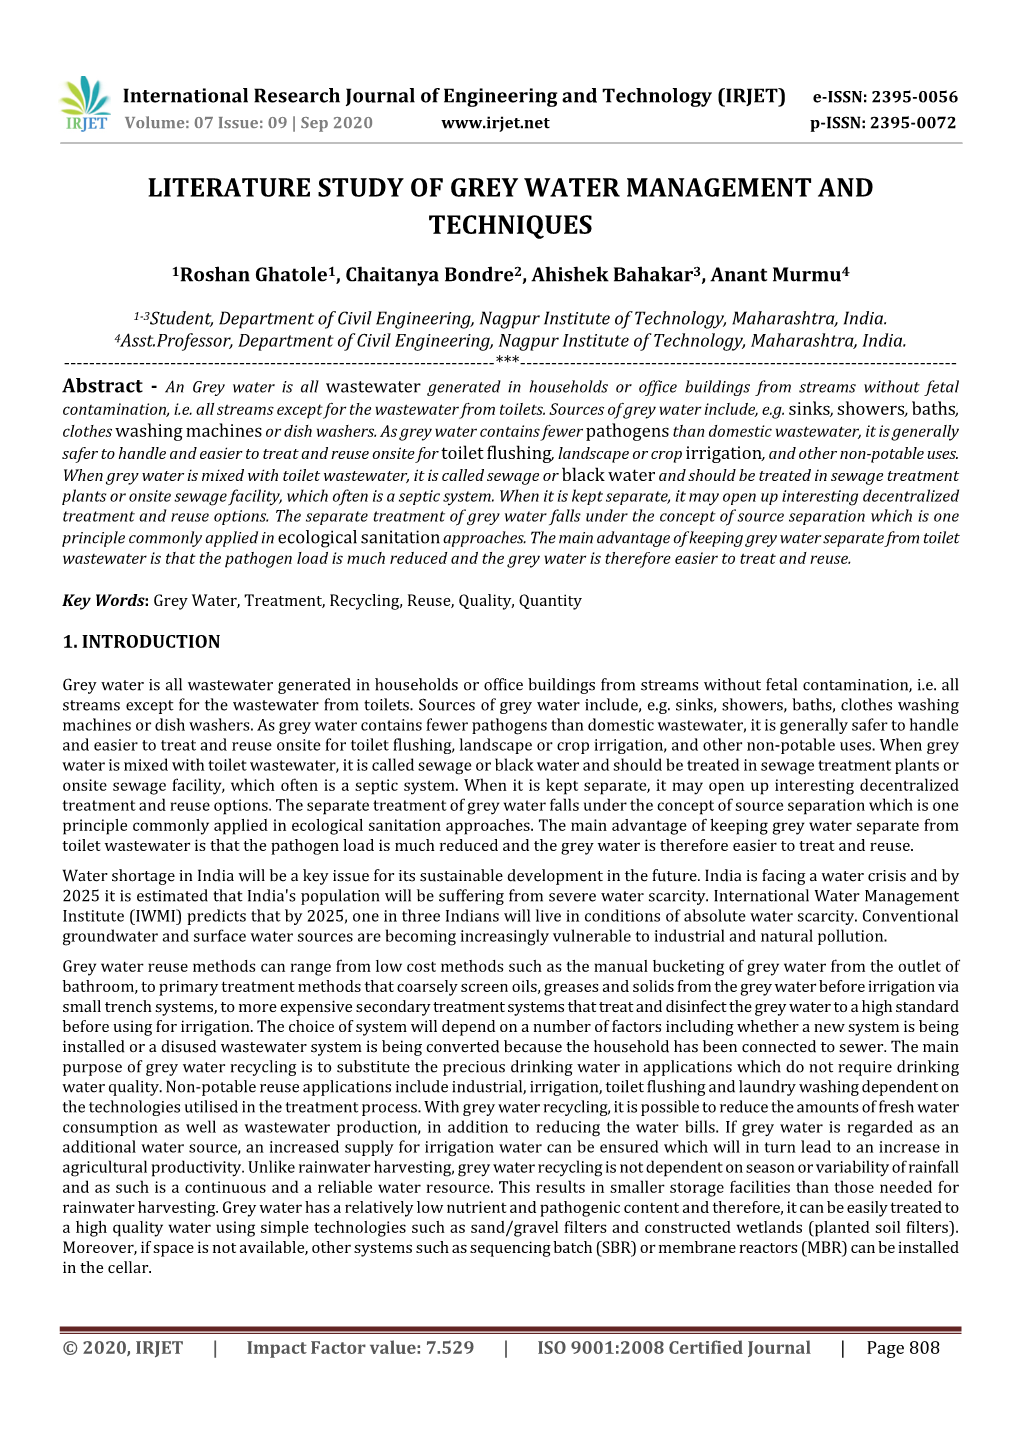 Literature Study of Grey Water Management and Techniques